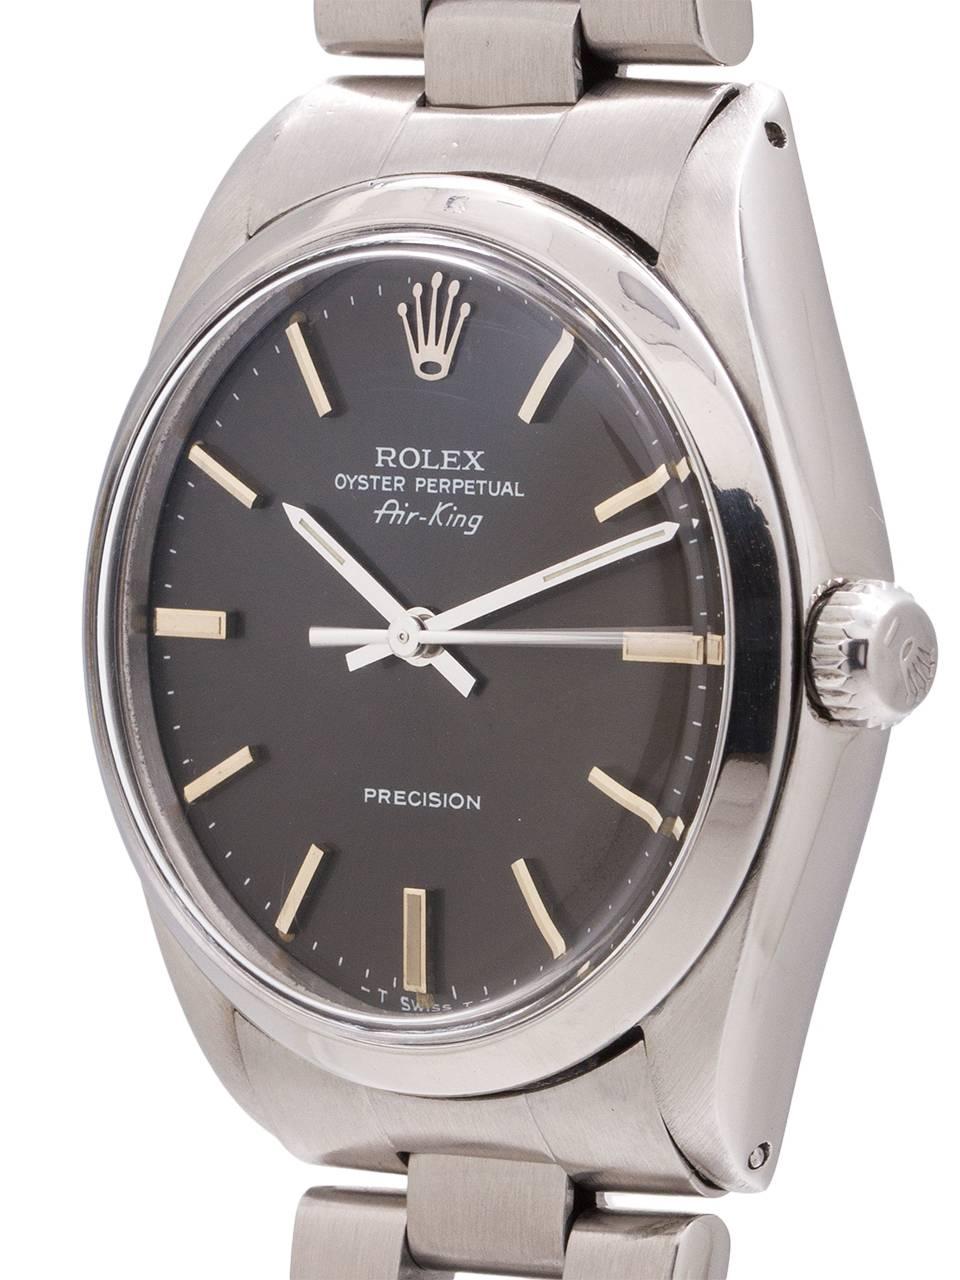 
An especially attractive and fine condition Rolex stainless steel Oyster Perpetual Airking ref 5500 serial #R million circa 1987. Featuring a 34mm diameter Oyster case with smooth bezel and acrylic crystal. With original grey dial that has just